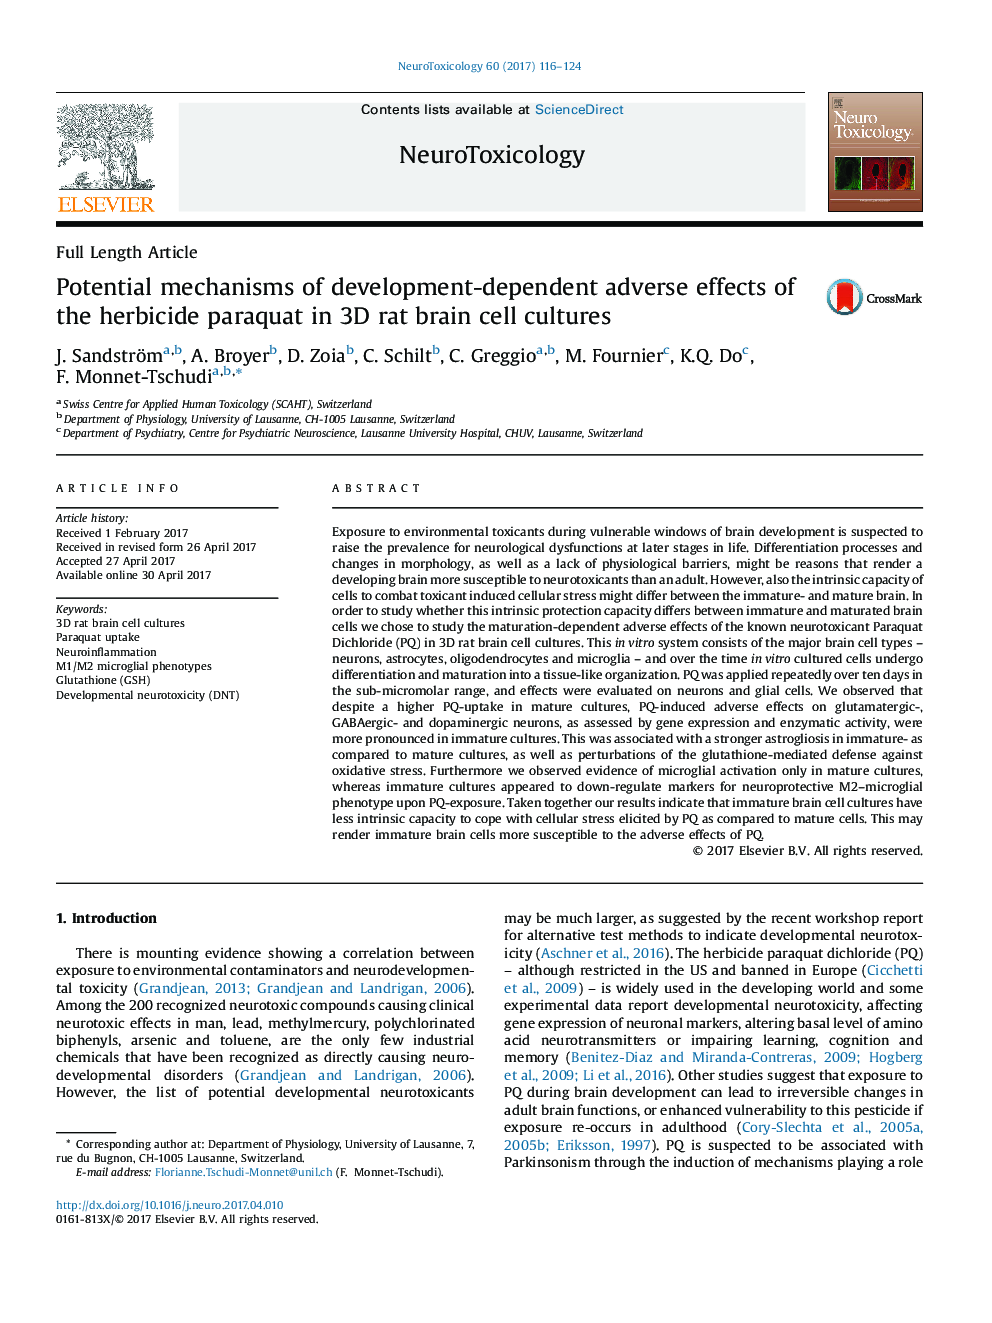 Potential mechanisms of development-dependent adverse effects of the herbicide paraquat in 3D rat brain cell cultures